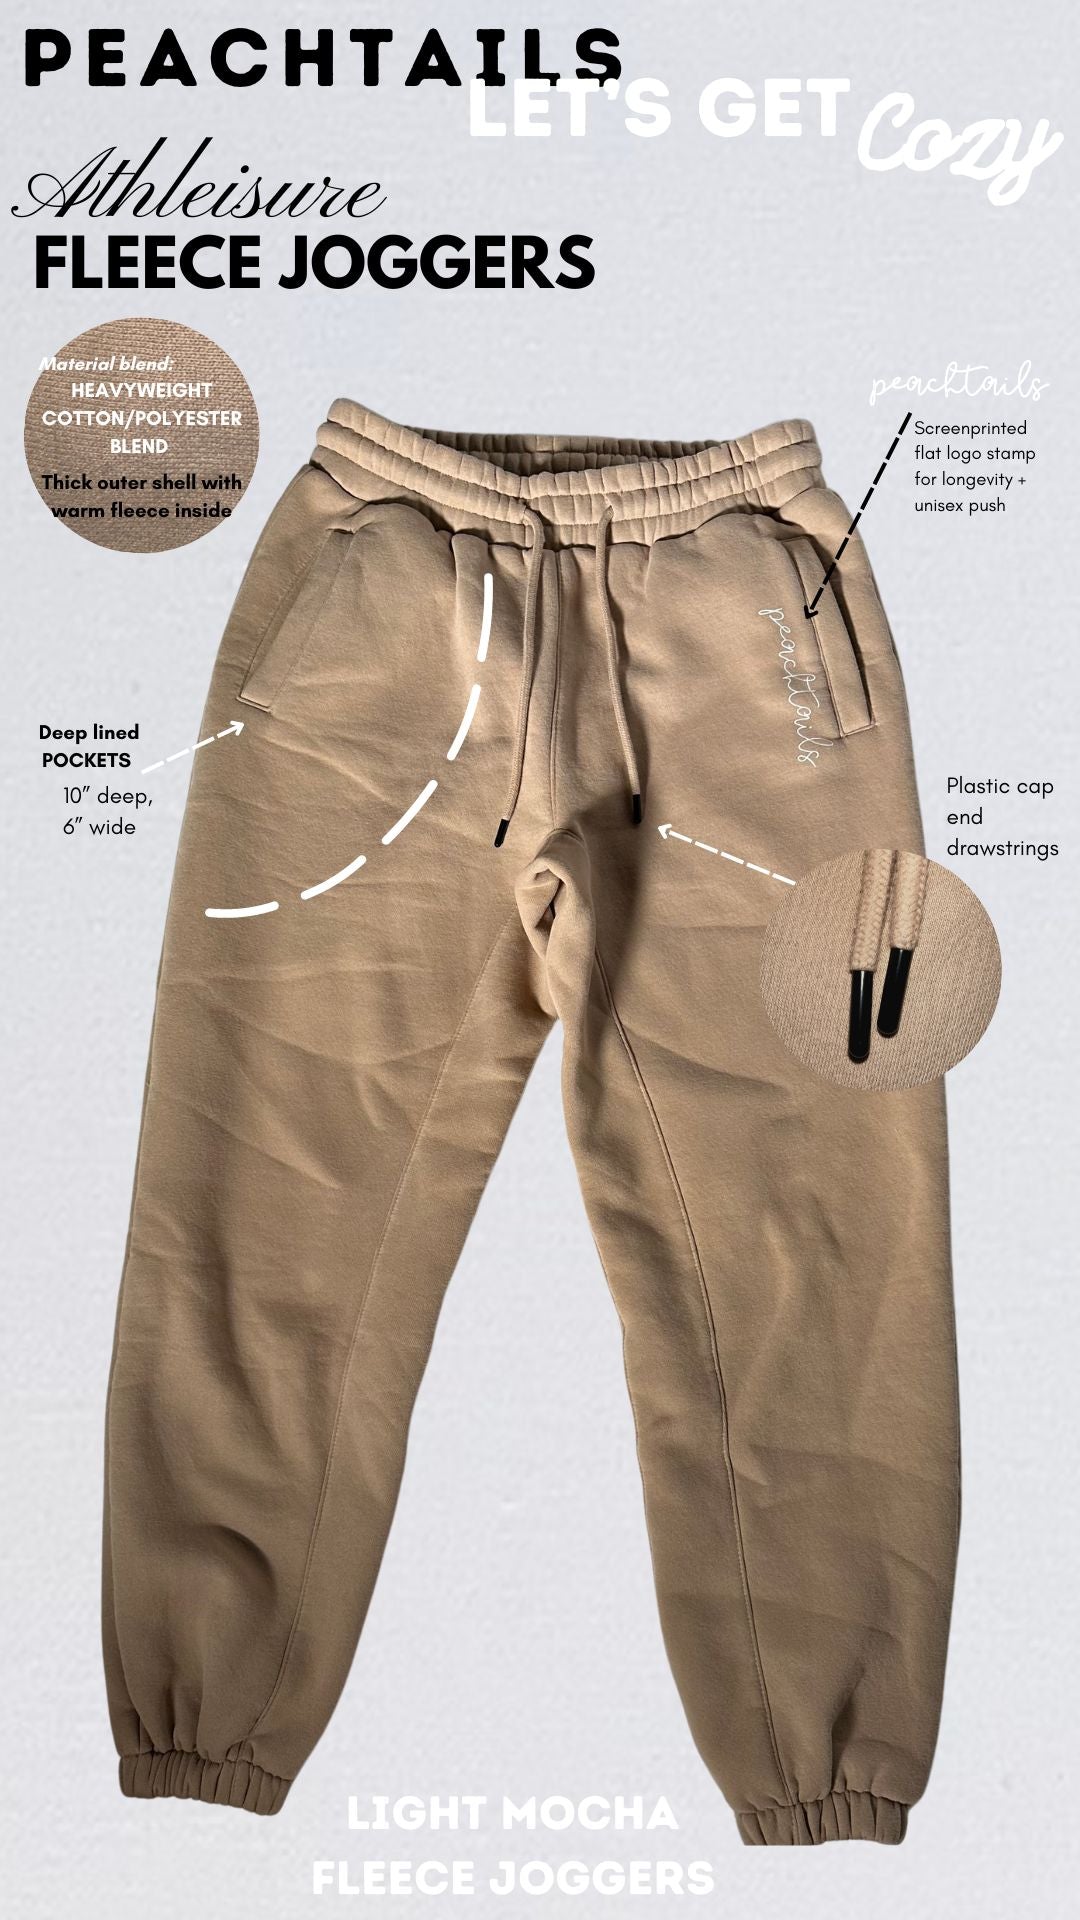 The image is an advertisement for Peachtails Athleisure Light Mocha Fleece Joggers with the tagline "Let's Get Cozy." It features the joggers with deep lined pockets, heavy-weight material blend, thick cuff shell, and plastic cap drawstrings. The Peachtails logo and segmented ribbing for lasting retention are also showcased.